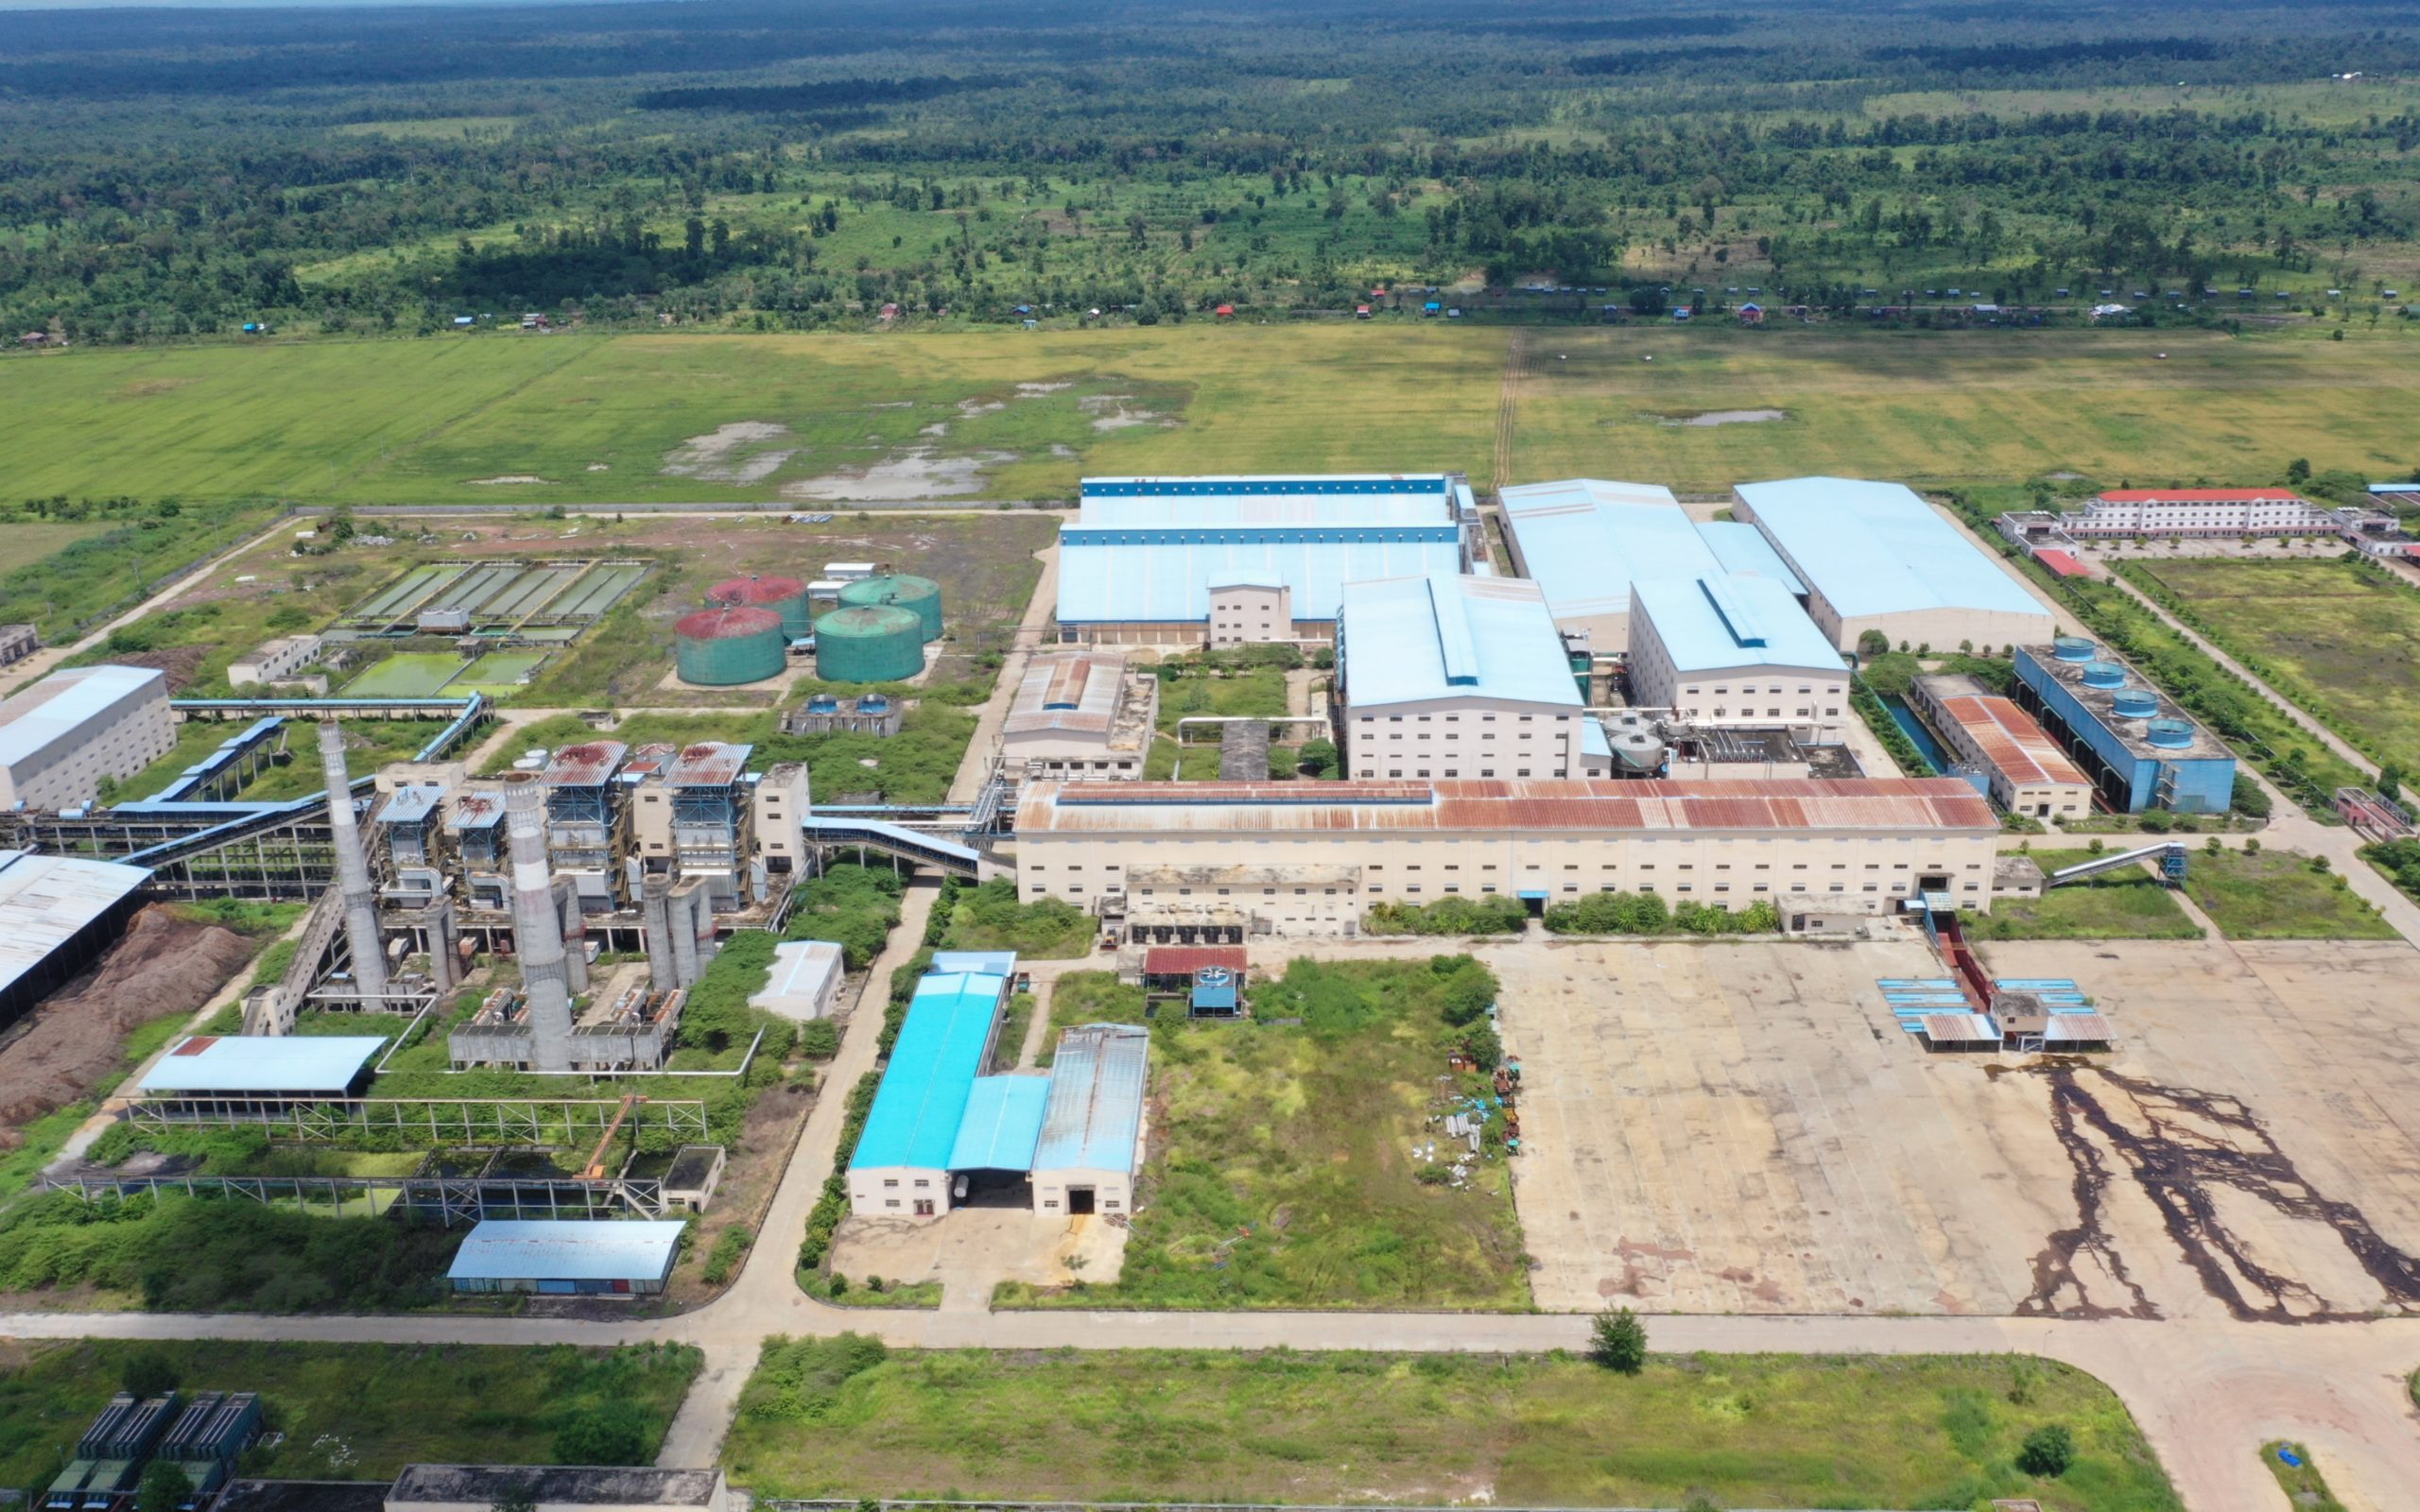 The Rui Feng sugarcane processing plant is abandoned in Preah Vihear province. (Heng Vichet/VOD)